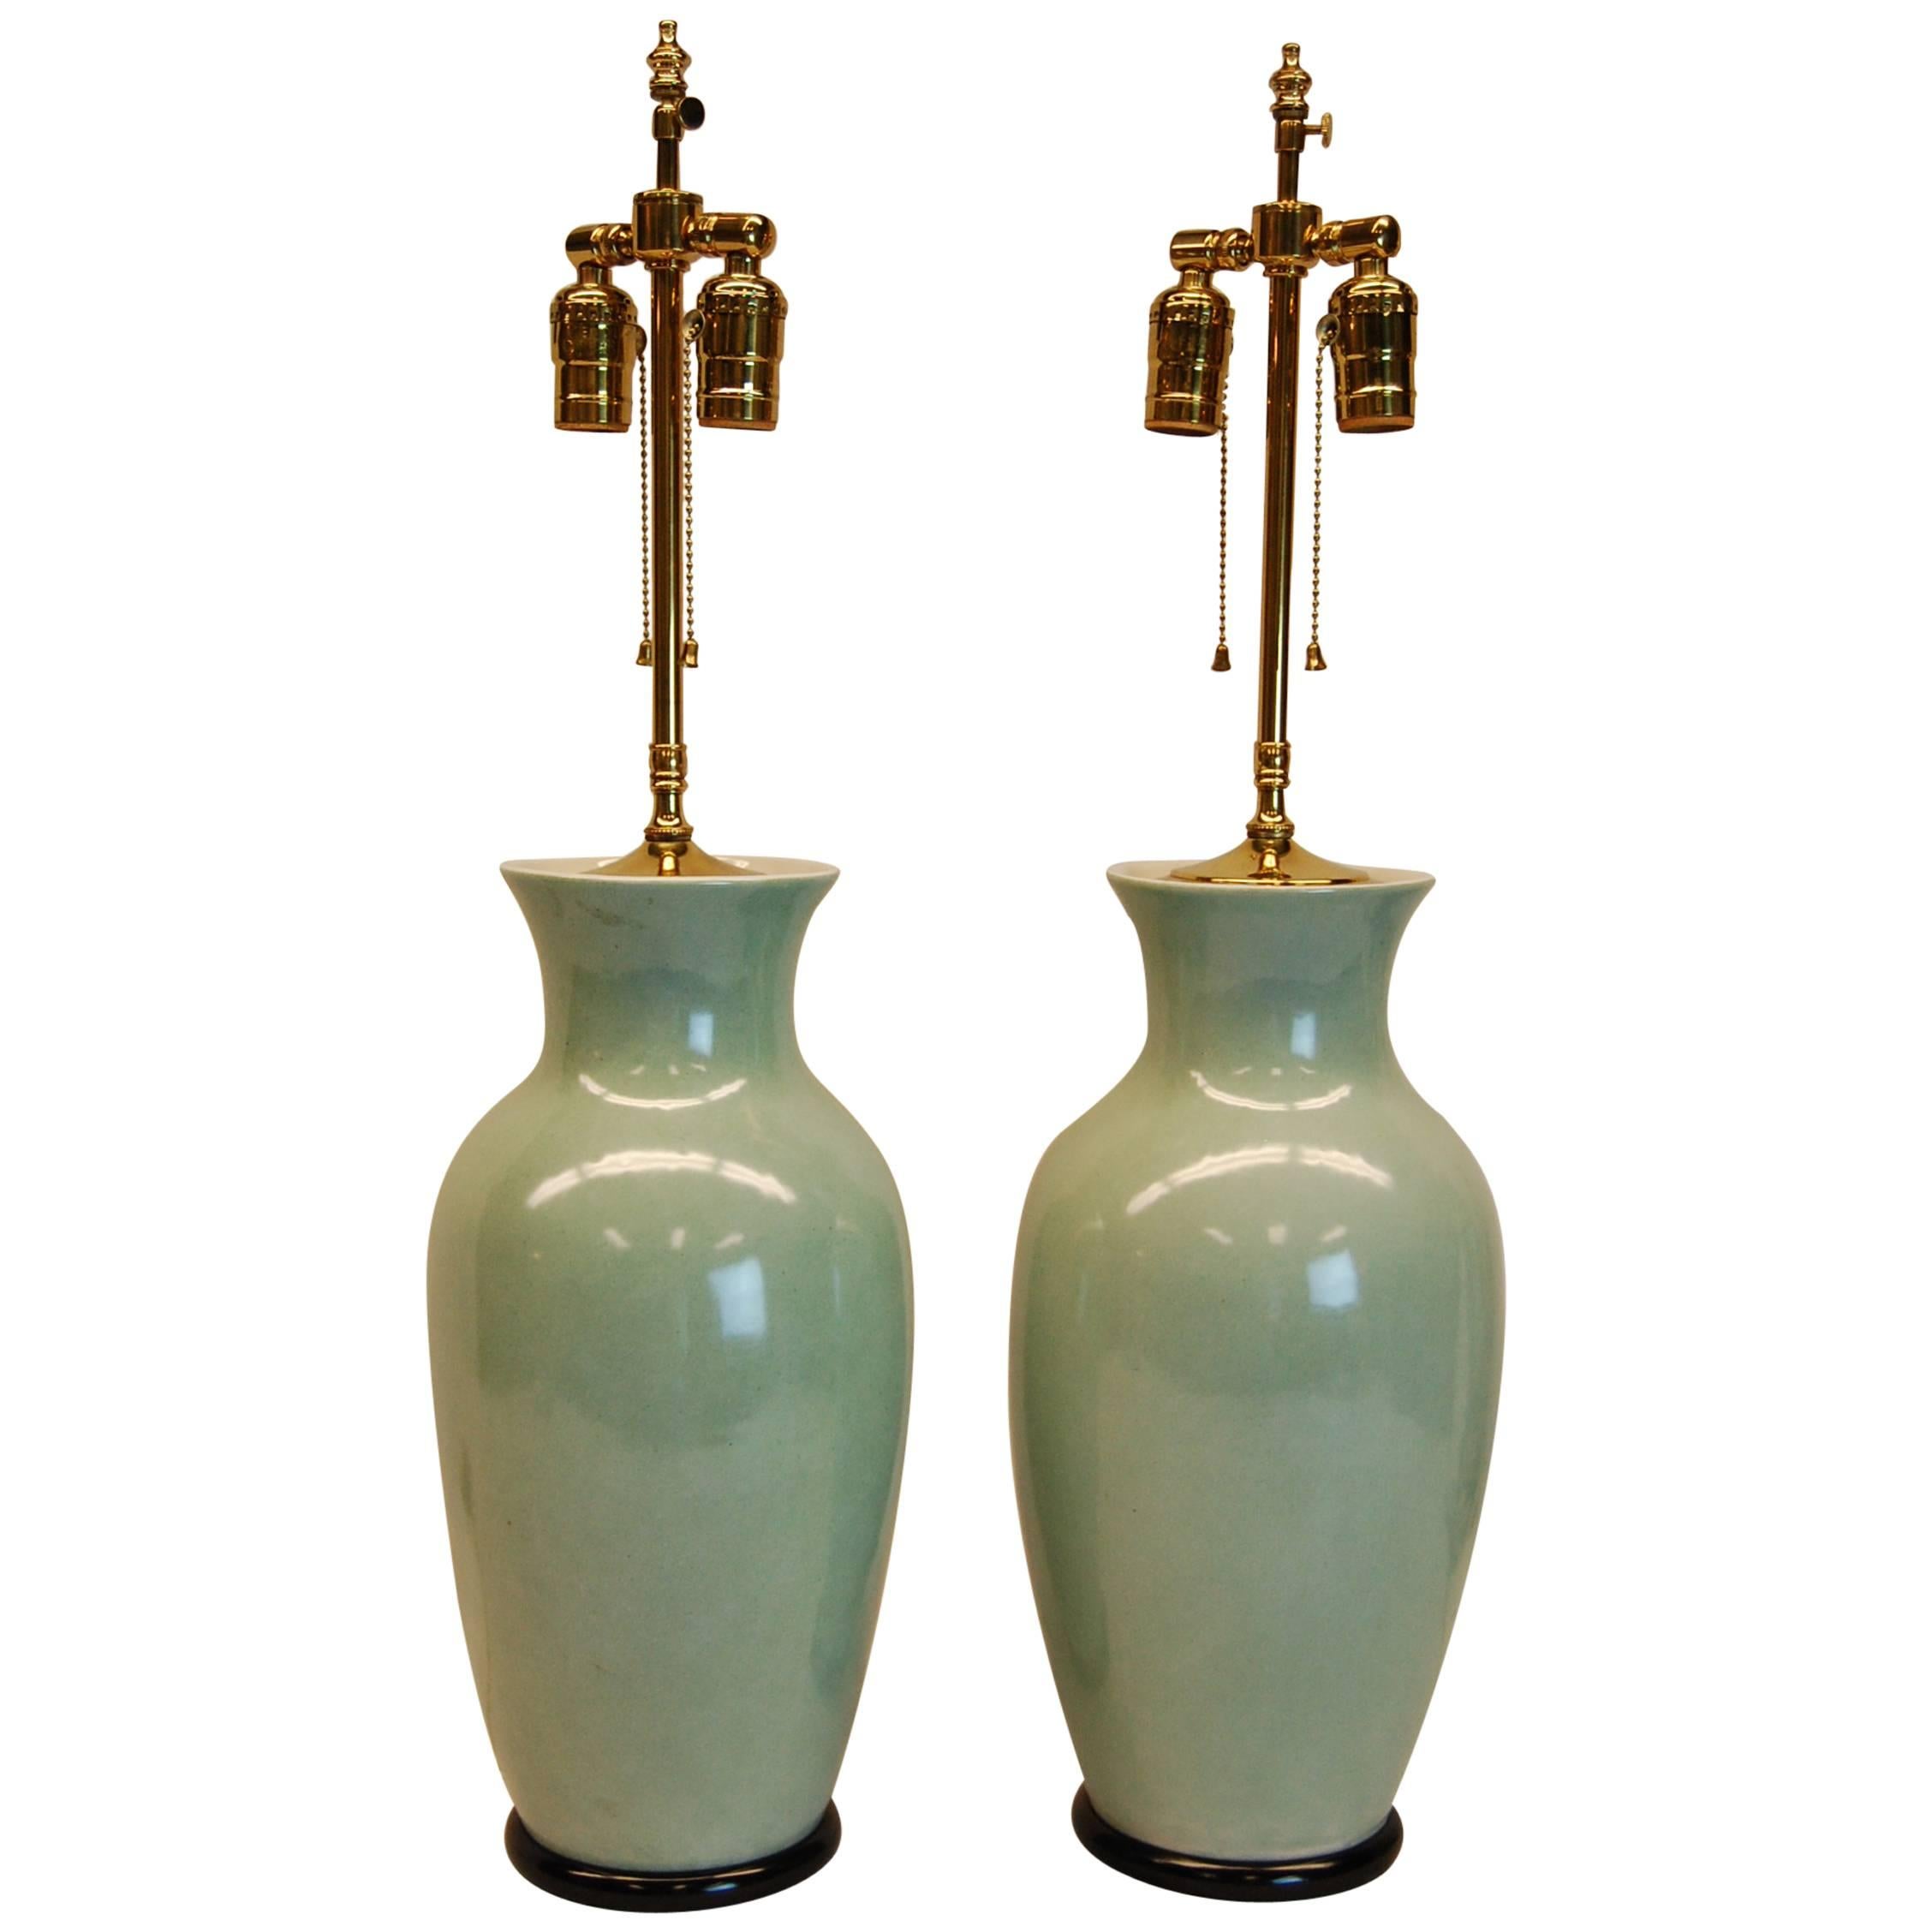 Pair of Early 20th Century Pale Celadon Chinese Urns Wired as Lamps